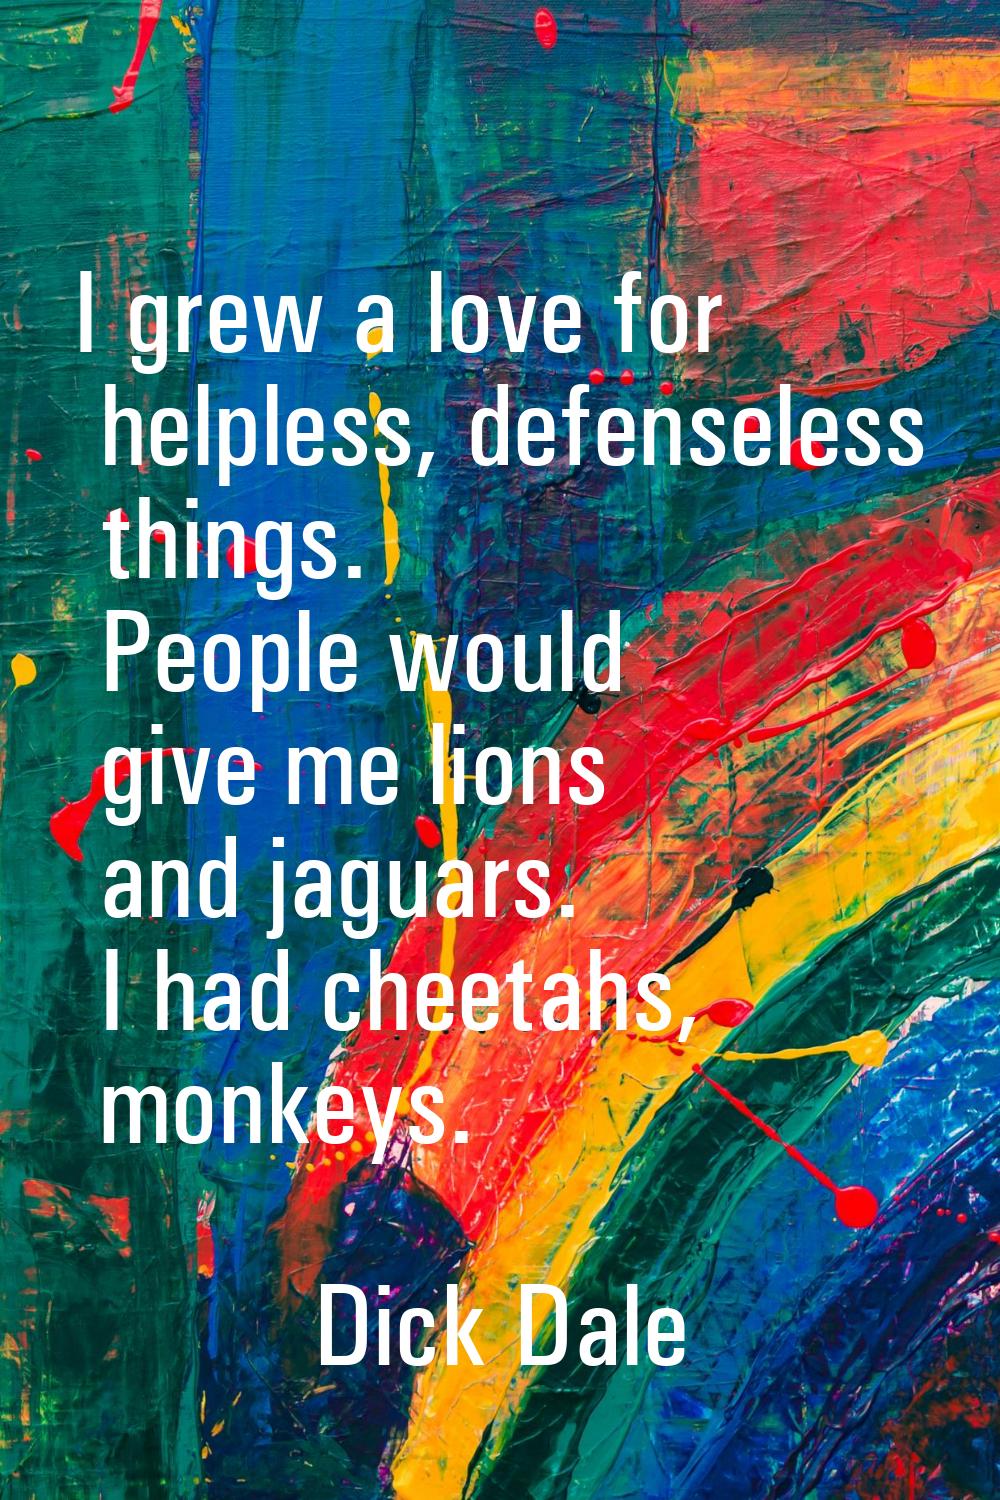 I grew a love for helpless, defenseless things. People would give me lions and jaguars. I had cheet